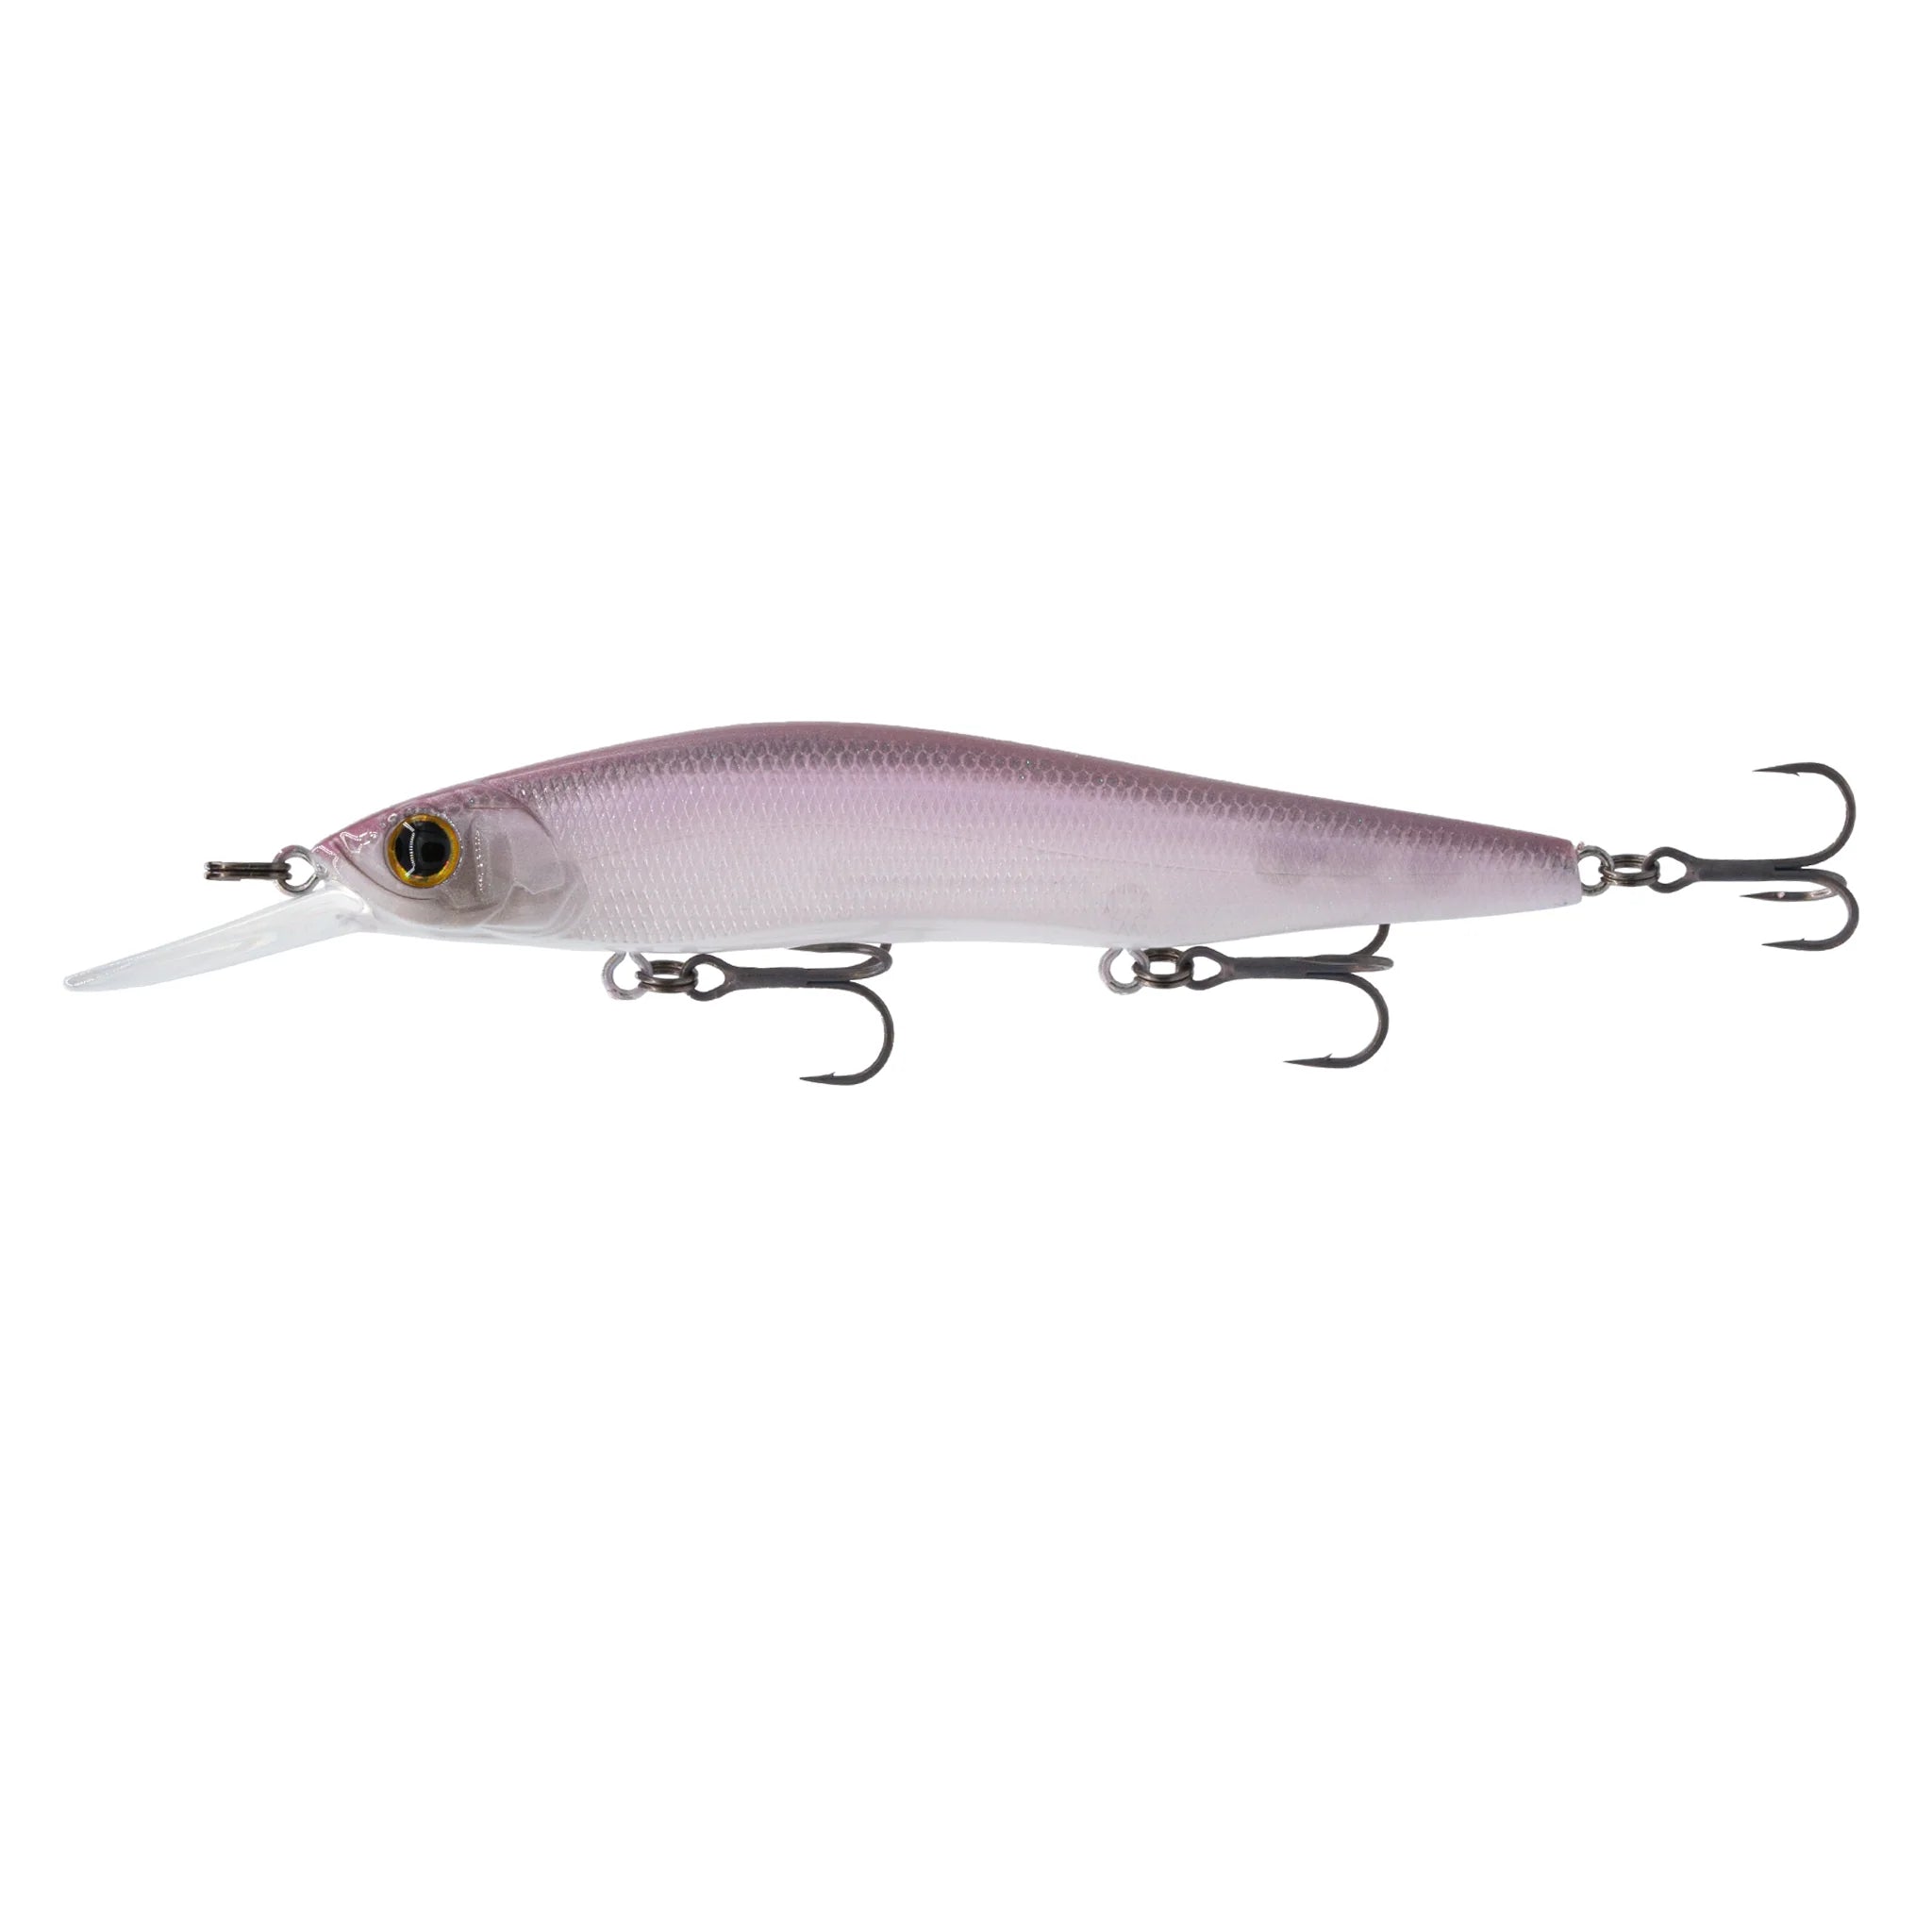 Shop Affordable Hard Life Bait and Tackle